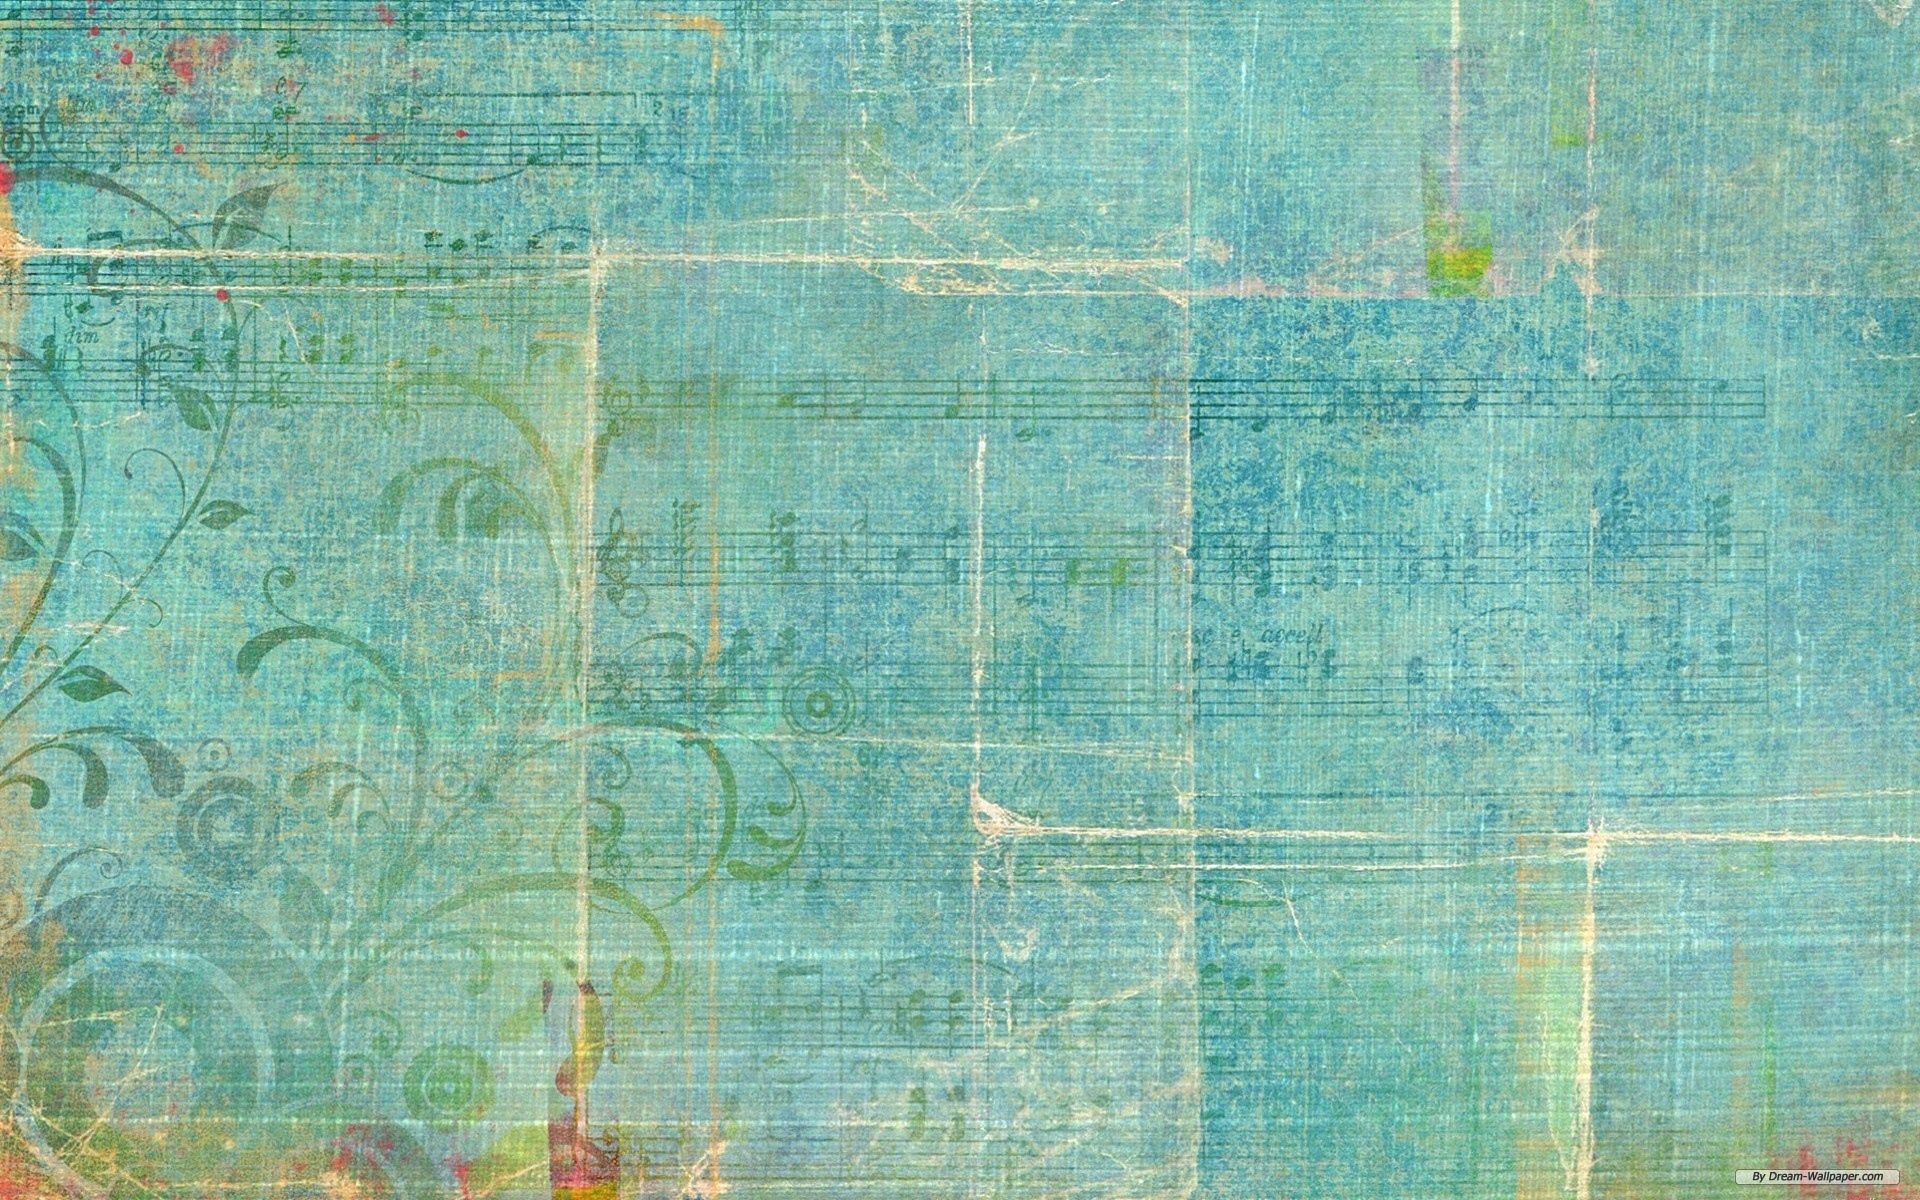 Horizontal Wallpaper patterns, background, texture, textures, surface, faded